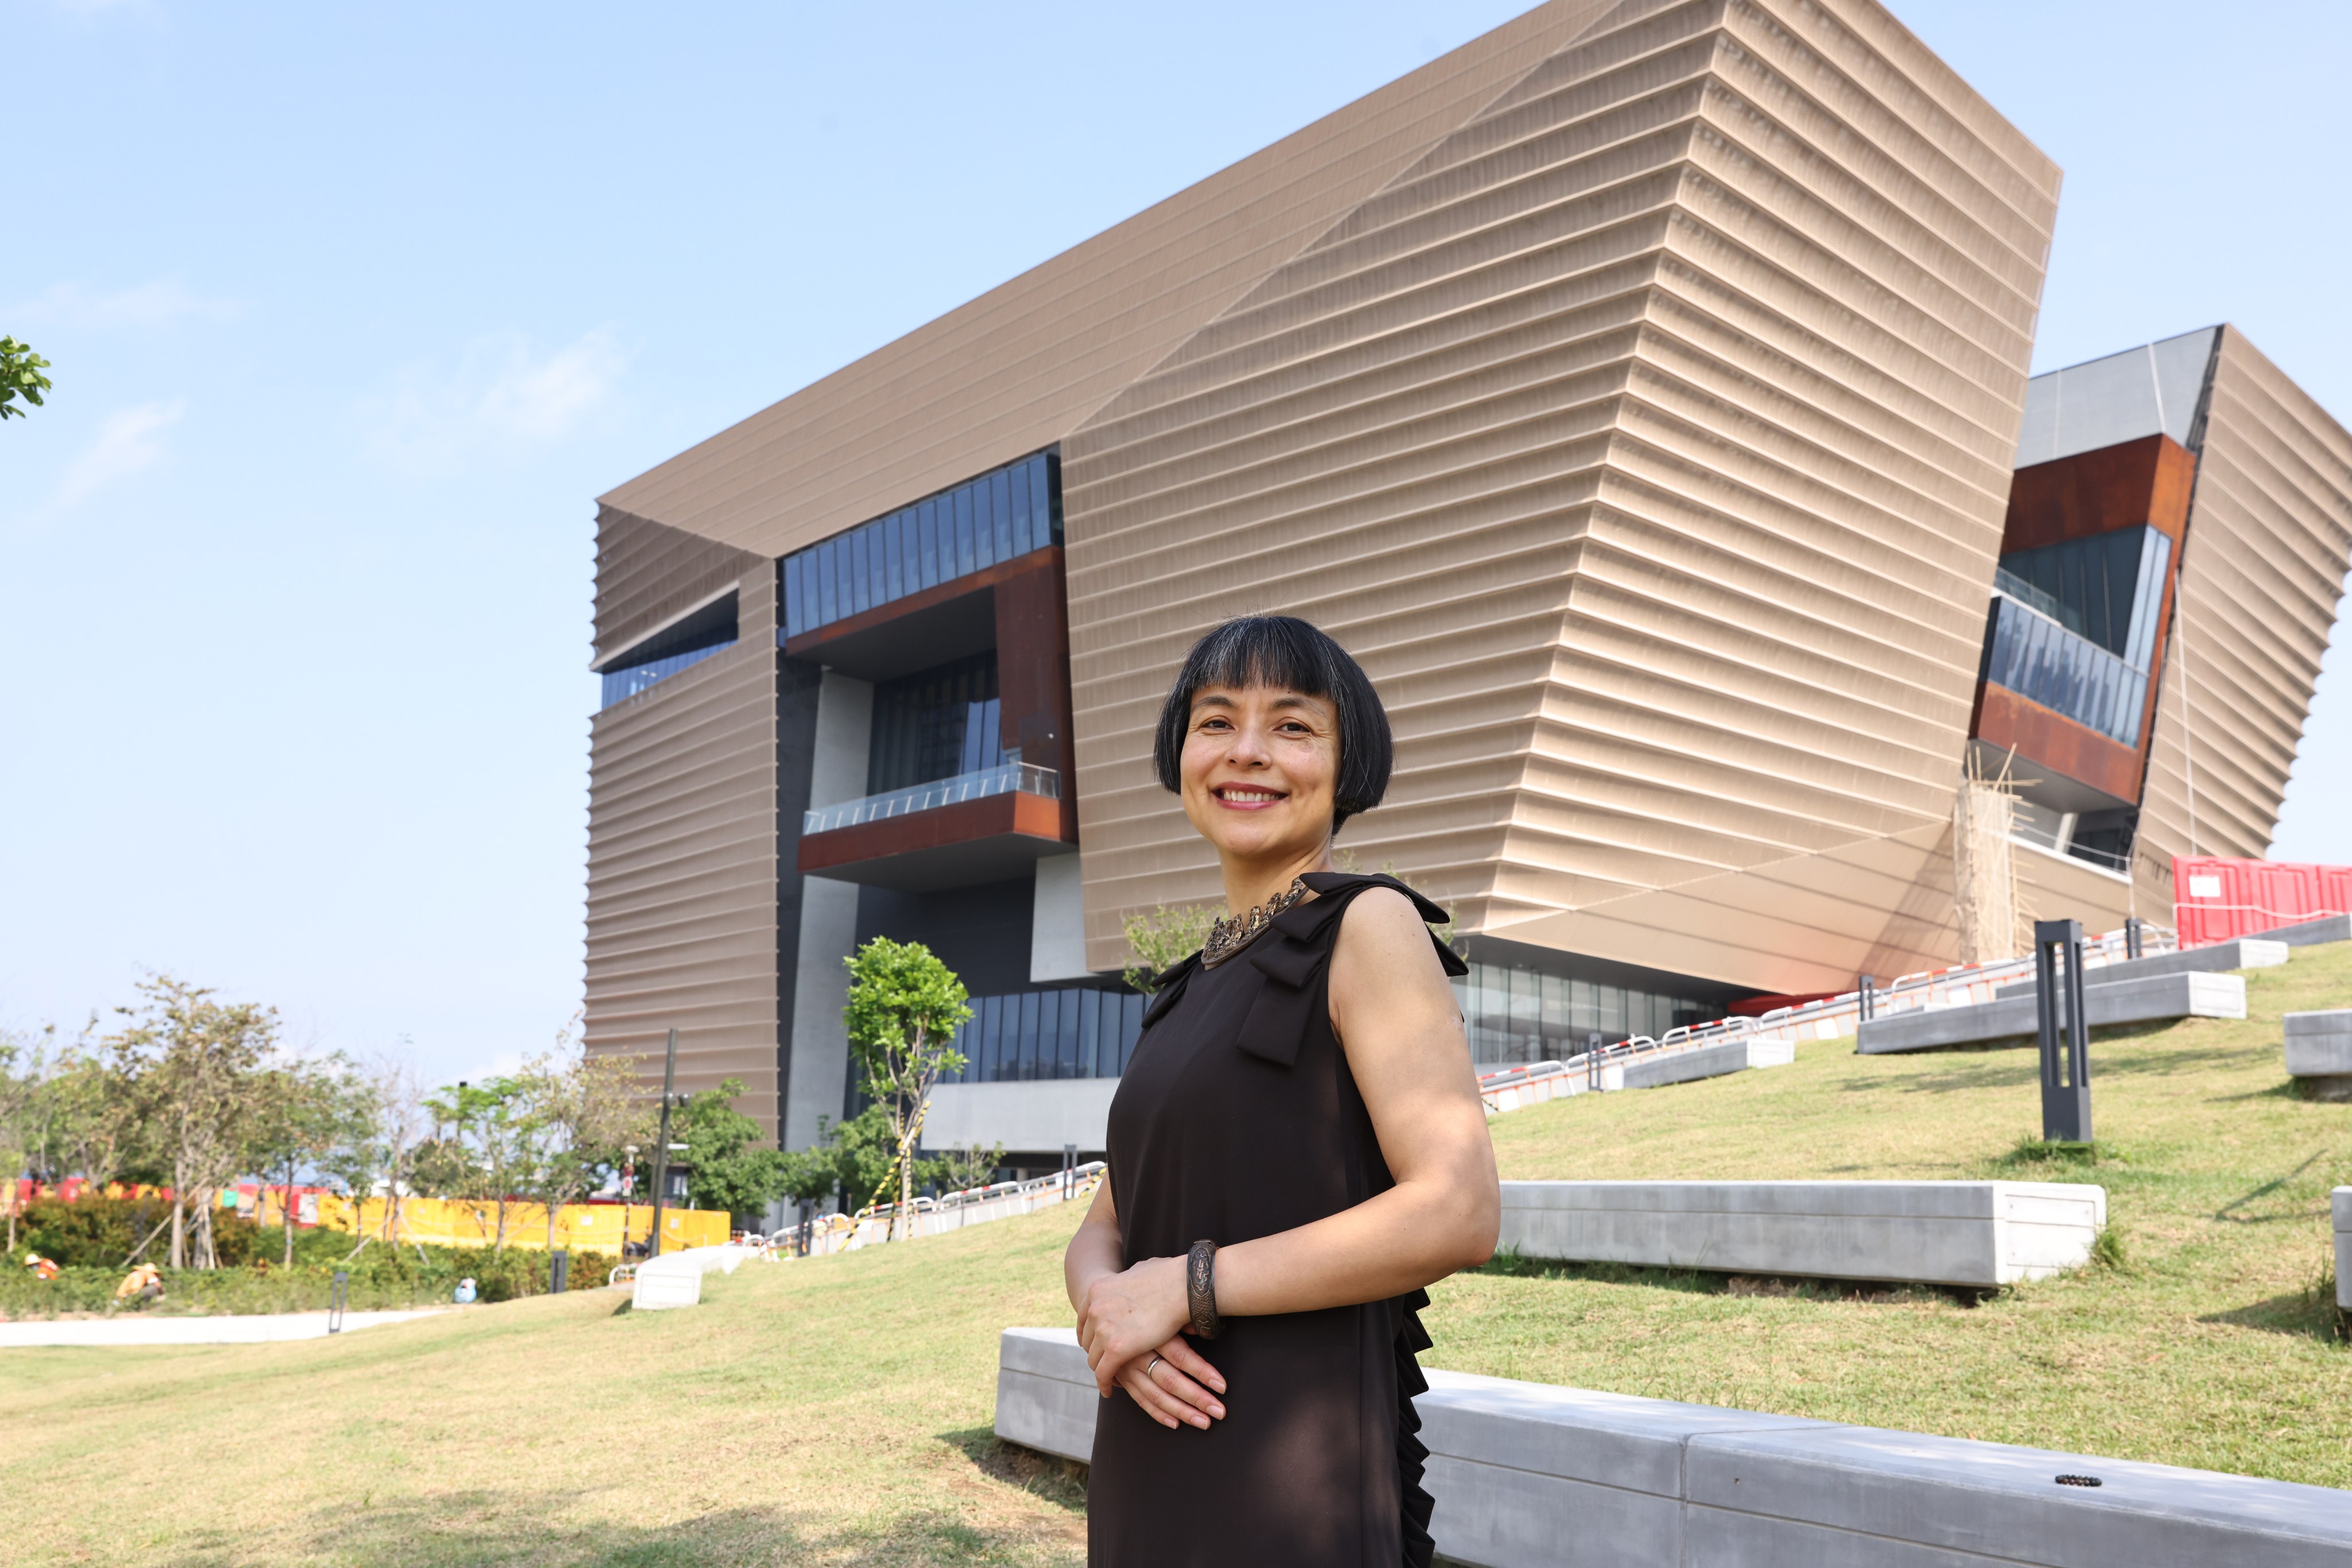 Daisy Wang Yiyou, deputy director of the Hong Kong Palace Museum, describes working there as beyond her wildest dreams. She is preparing for its opening this summer. Photo: K. Y. Cheng